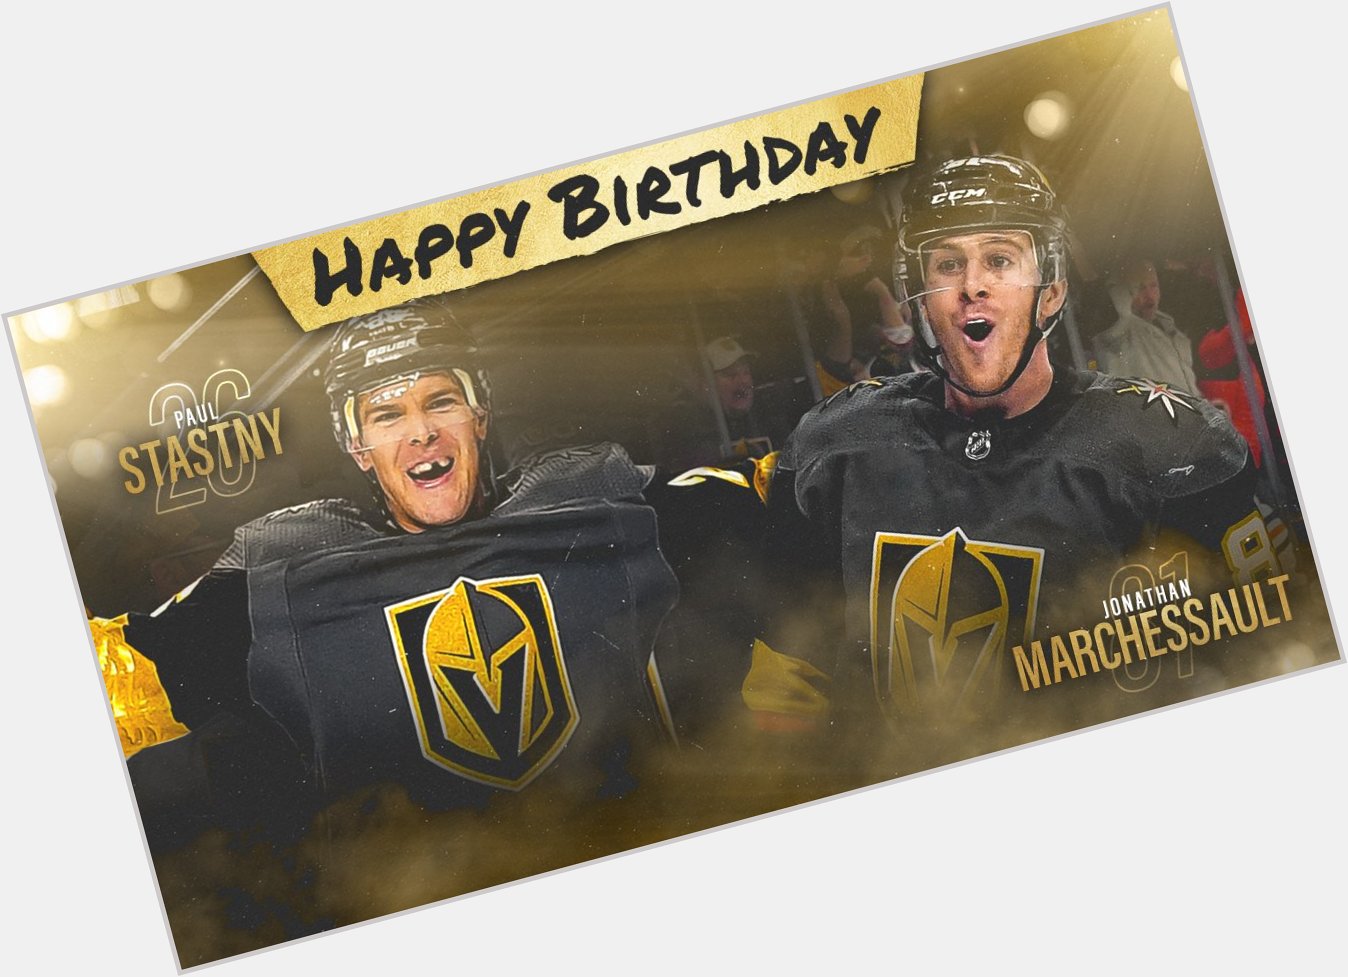 We\ve got two birthdays today!!!

Everyone wish a happy birthday to Jonathan Marchessault and Paul Stastny!  